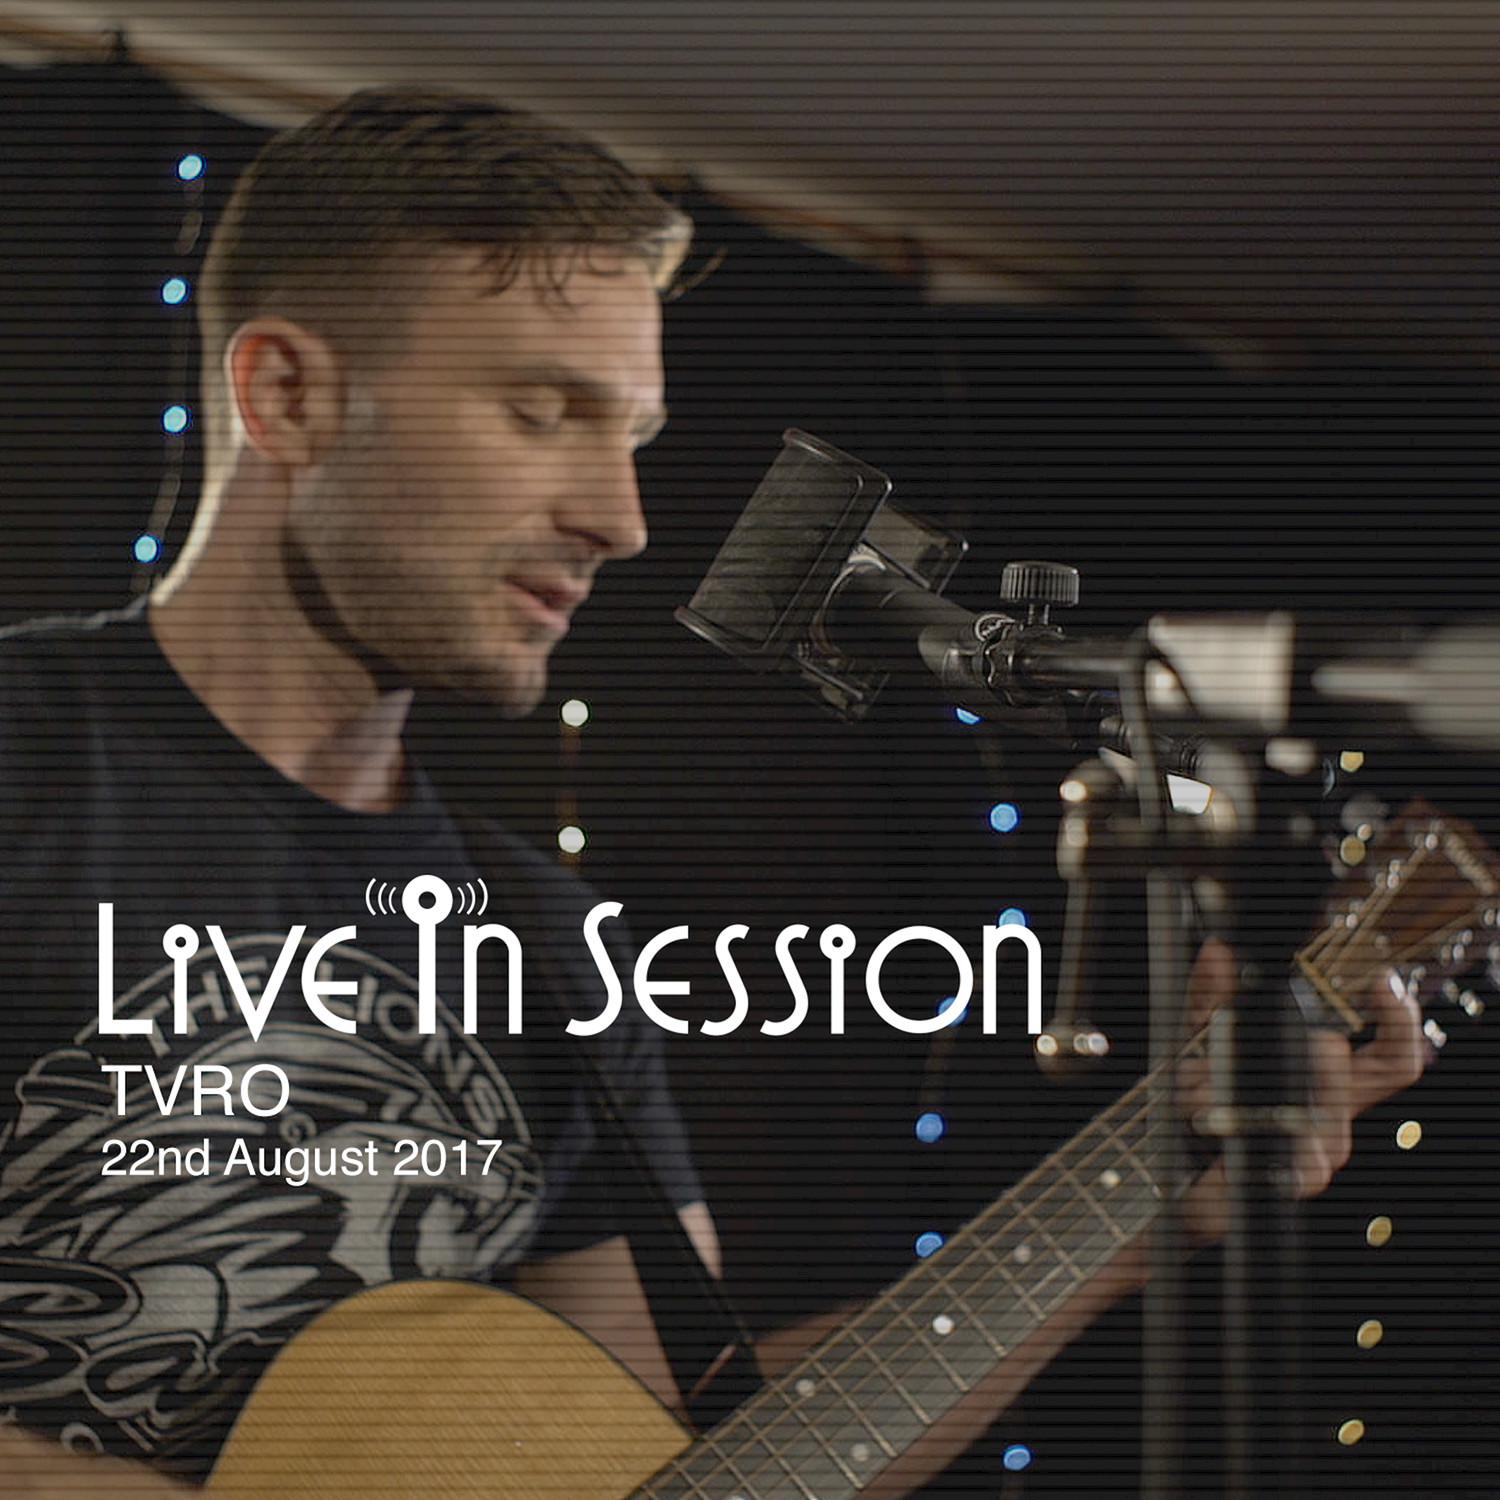 We Have to Go to Work (Live in Session)